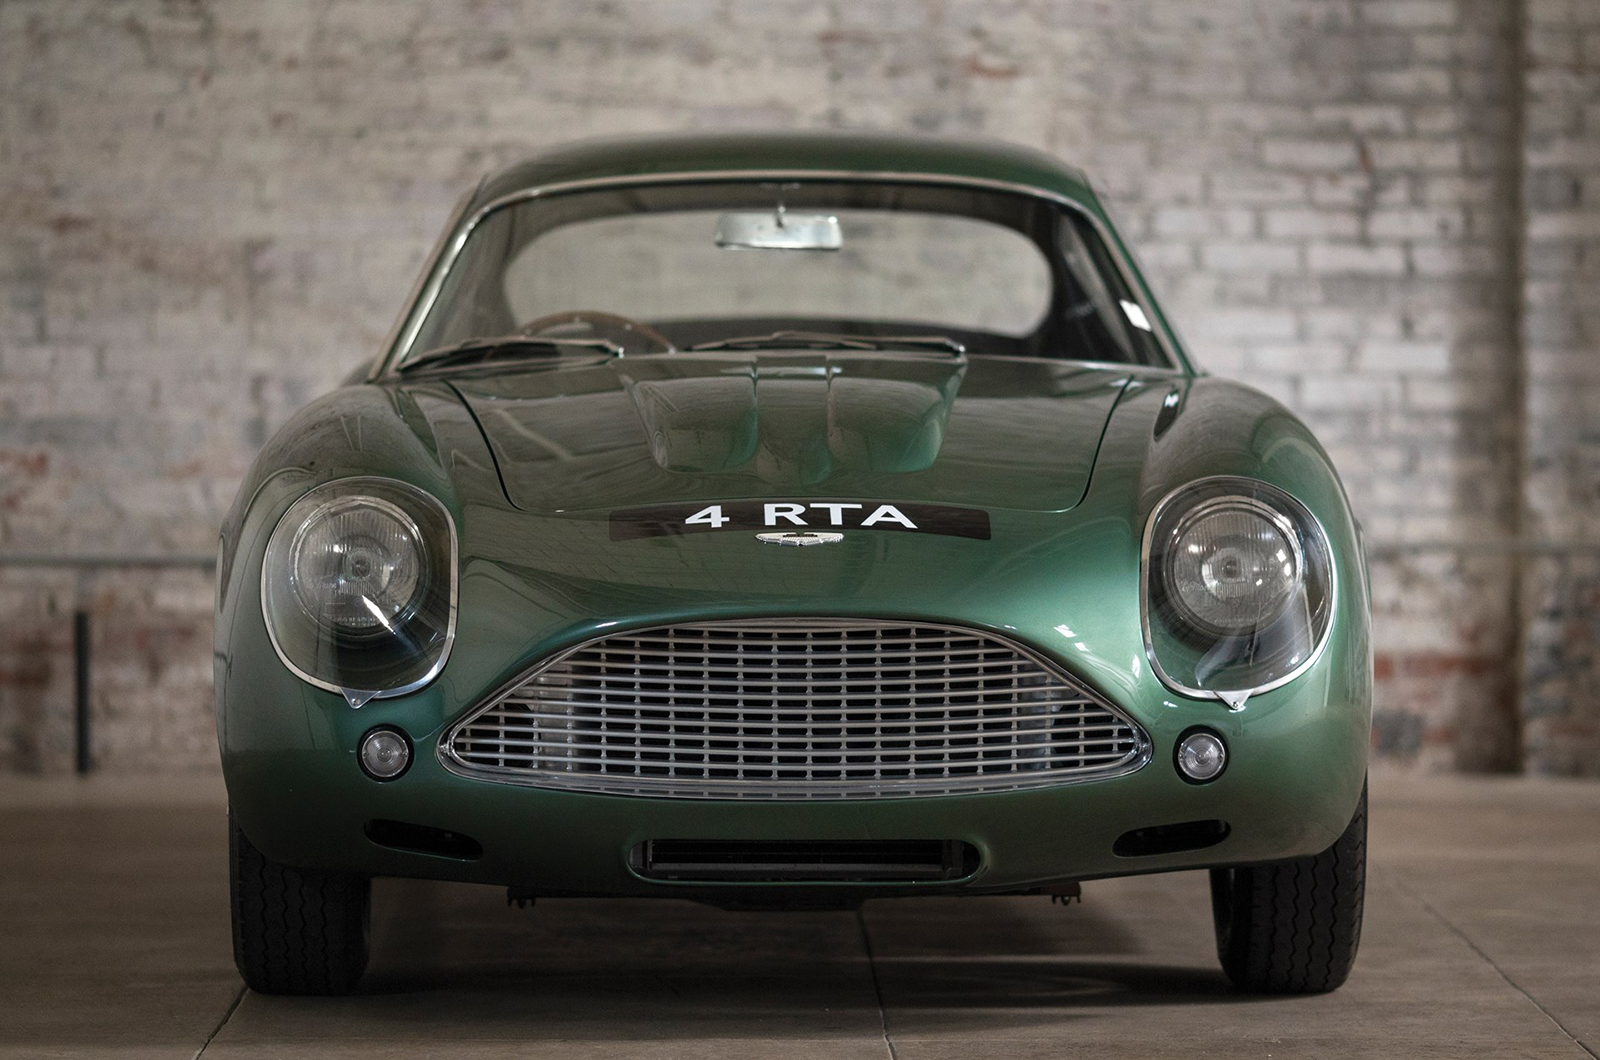 Classic & Sports Car – DB4GT Zagato joins the ‘continuation’ gang